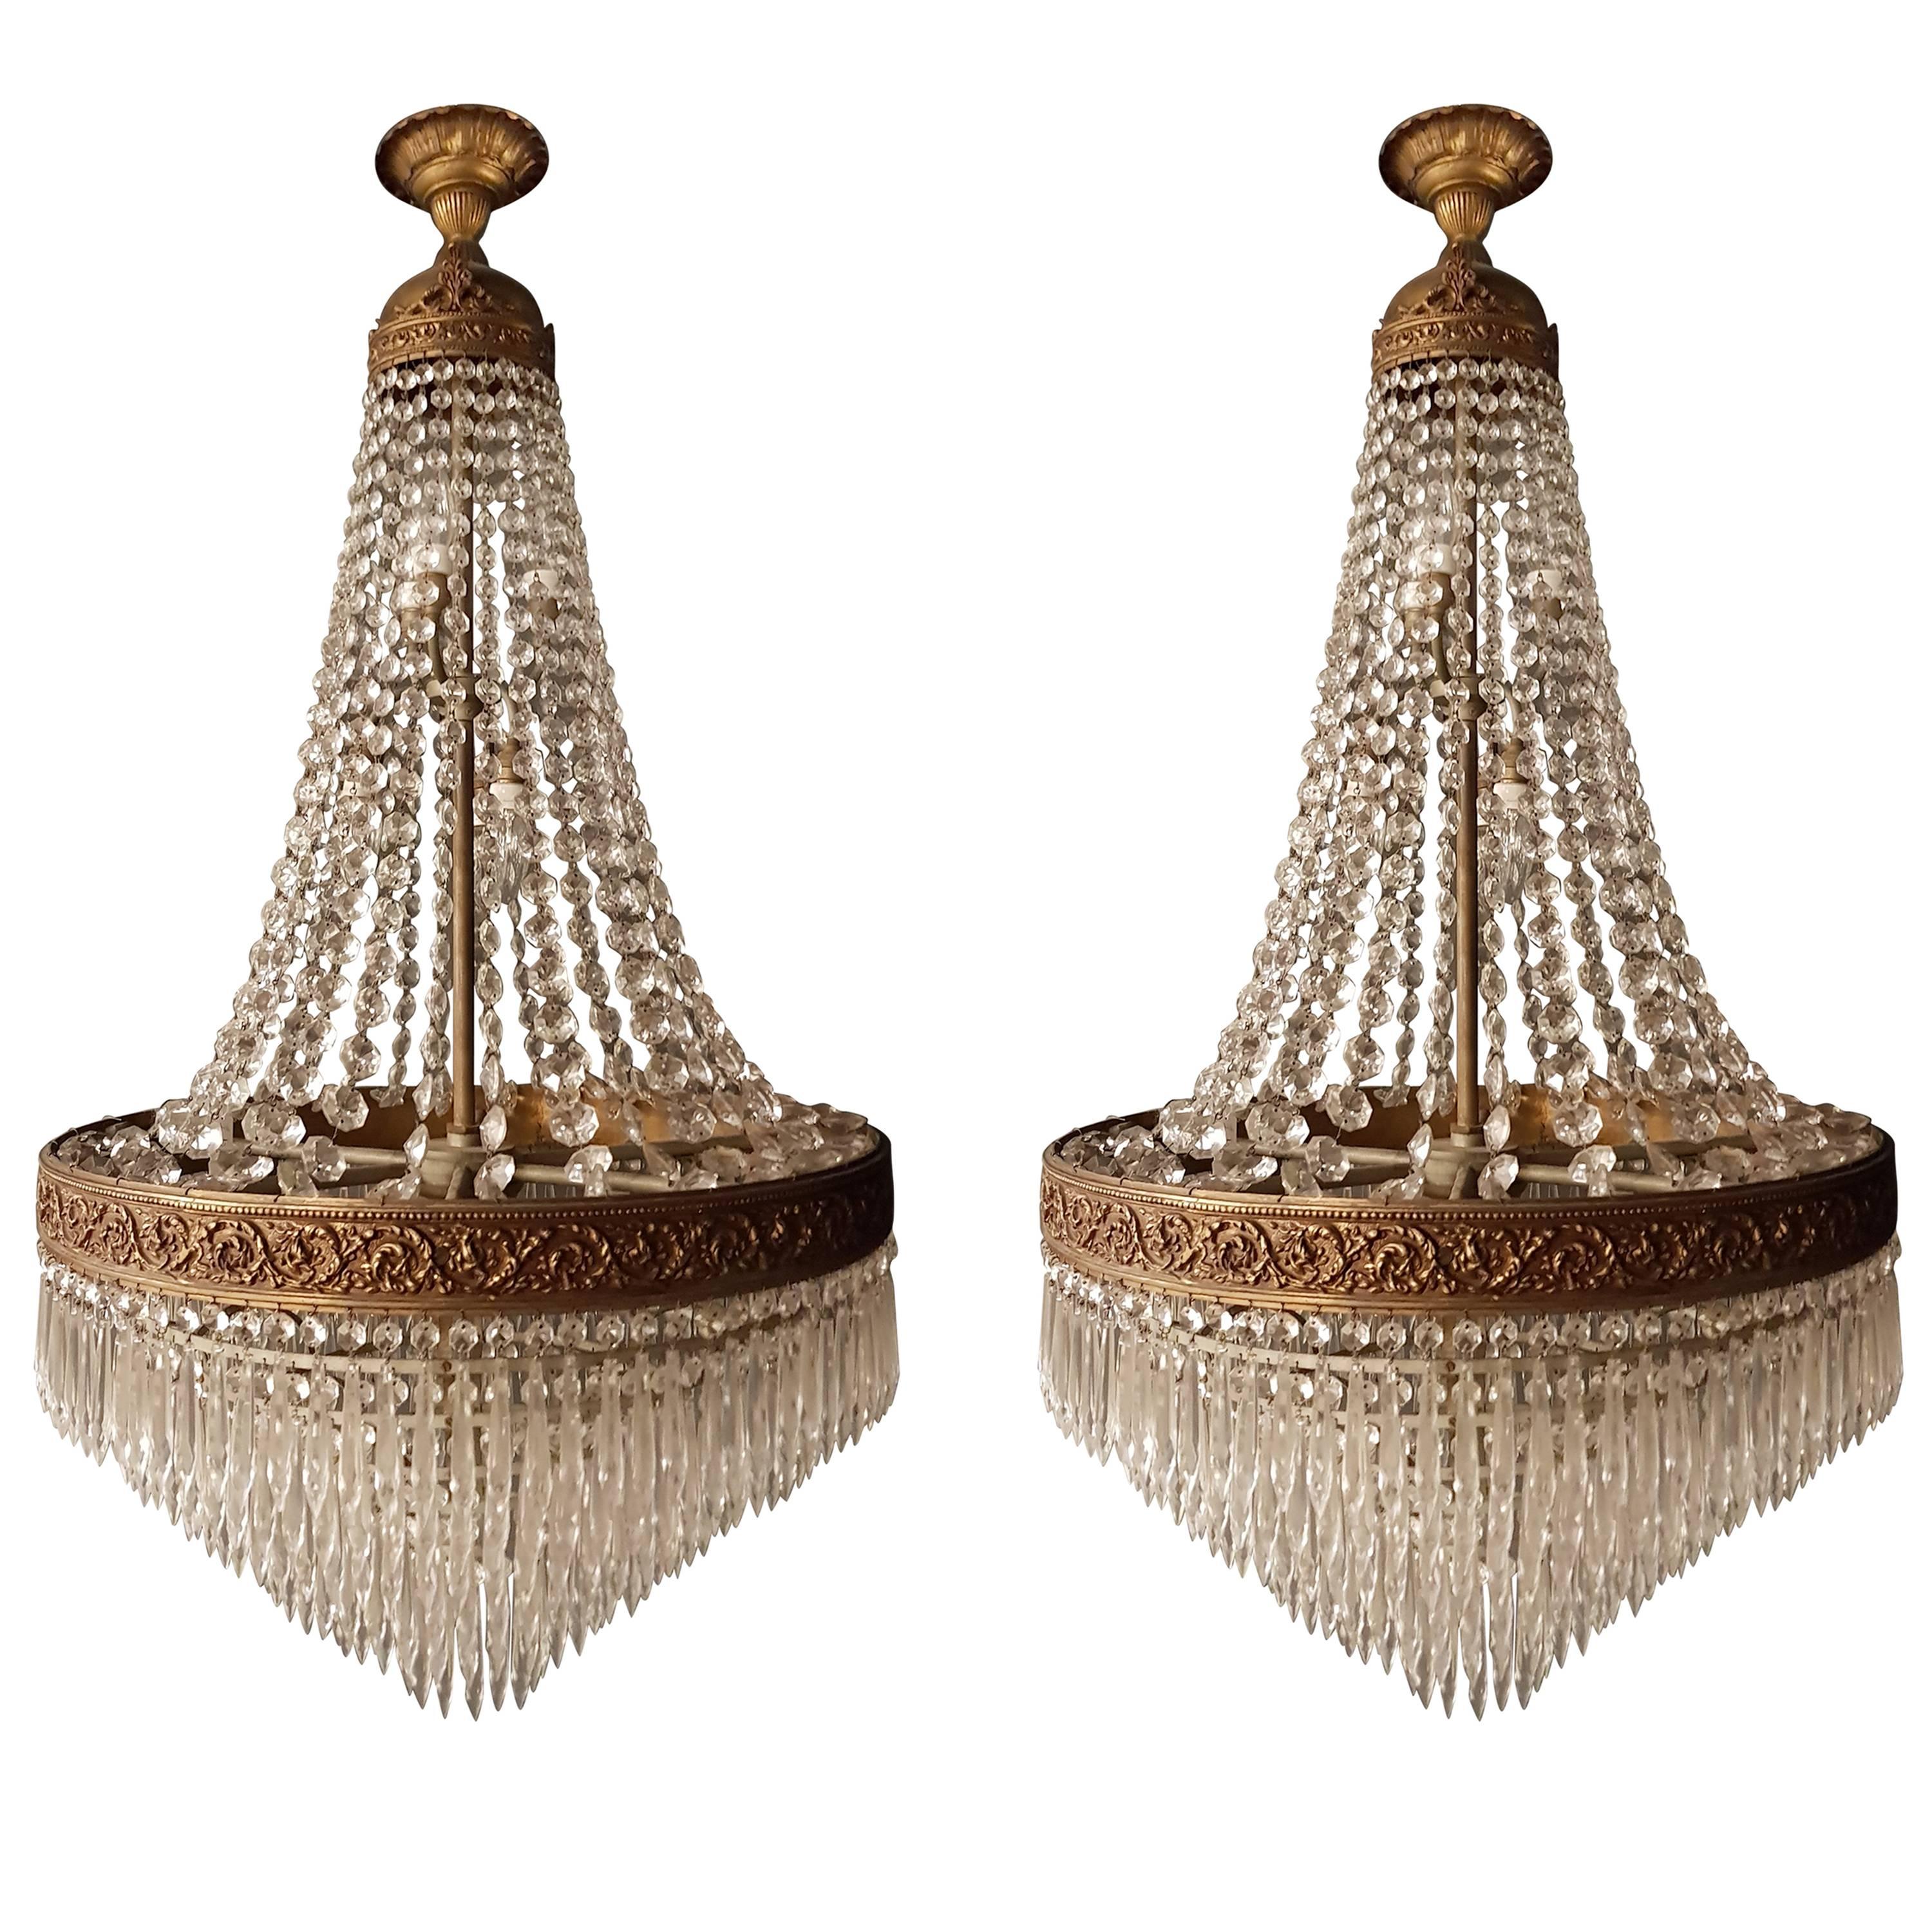 Empire Set 2x 'Sac a Perle' Pair of Crystal Chandelier Lustre Brass Ceiling Lamp